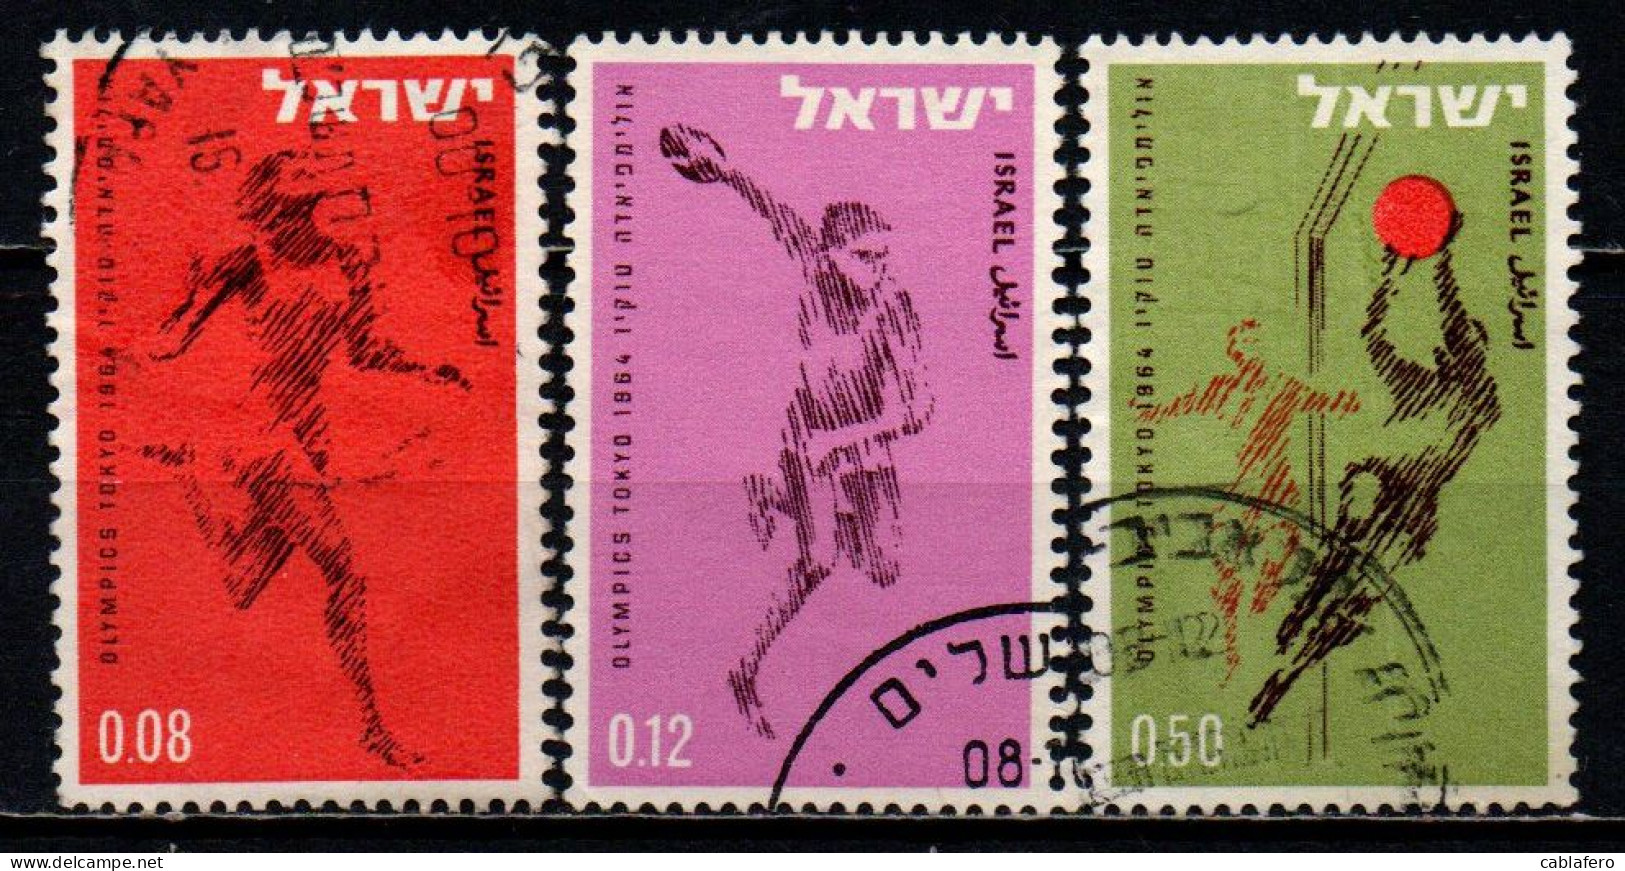 ISRAELE - 1964 - Israel’s Participation In The 18th Olympic Games, Tokyo, Oct. 10-25 - USATI - Gebruikt (zonder Tabs)